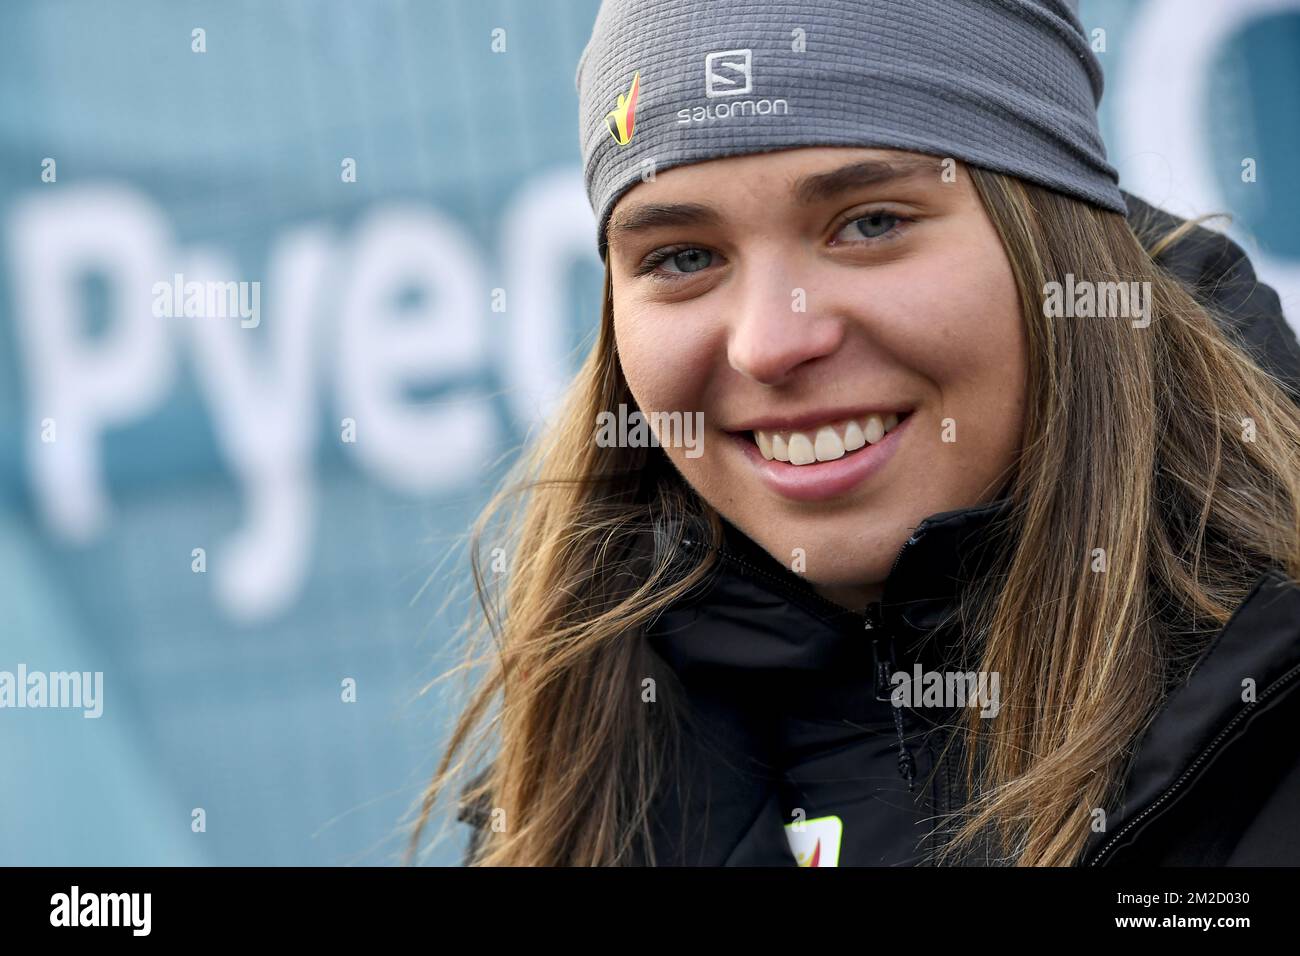 Belgian skier Kim Vanreusel poses for photographer after a press meeting at the XXIII Olympic Winter Games, Saturday 10 February 2018, in Pyeongchang, South Korea. The Winter Olympics are taking place from 9 February to 25 February in Pyeongchang County, South Korea. BELGA PHOTO DIRK WAEM Stock Photo